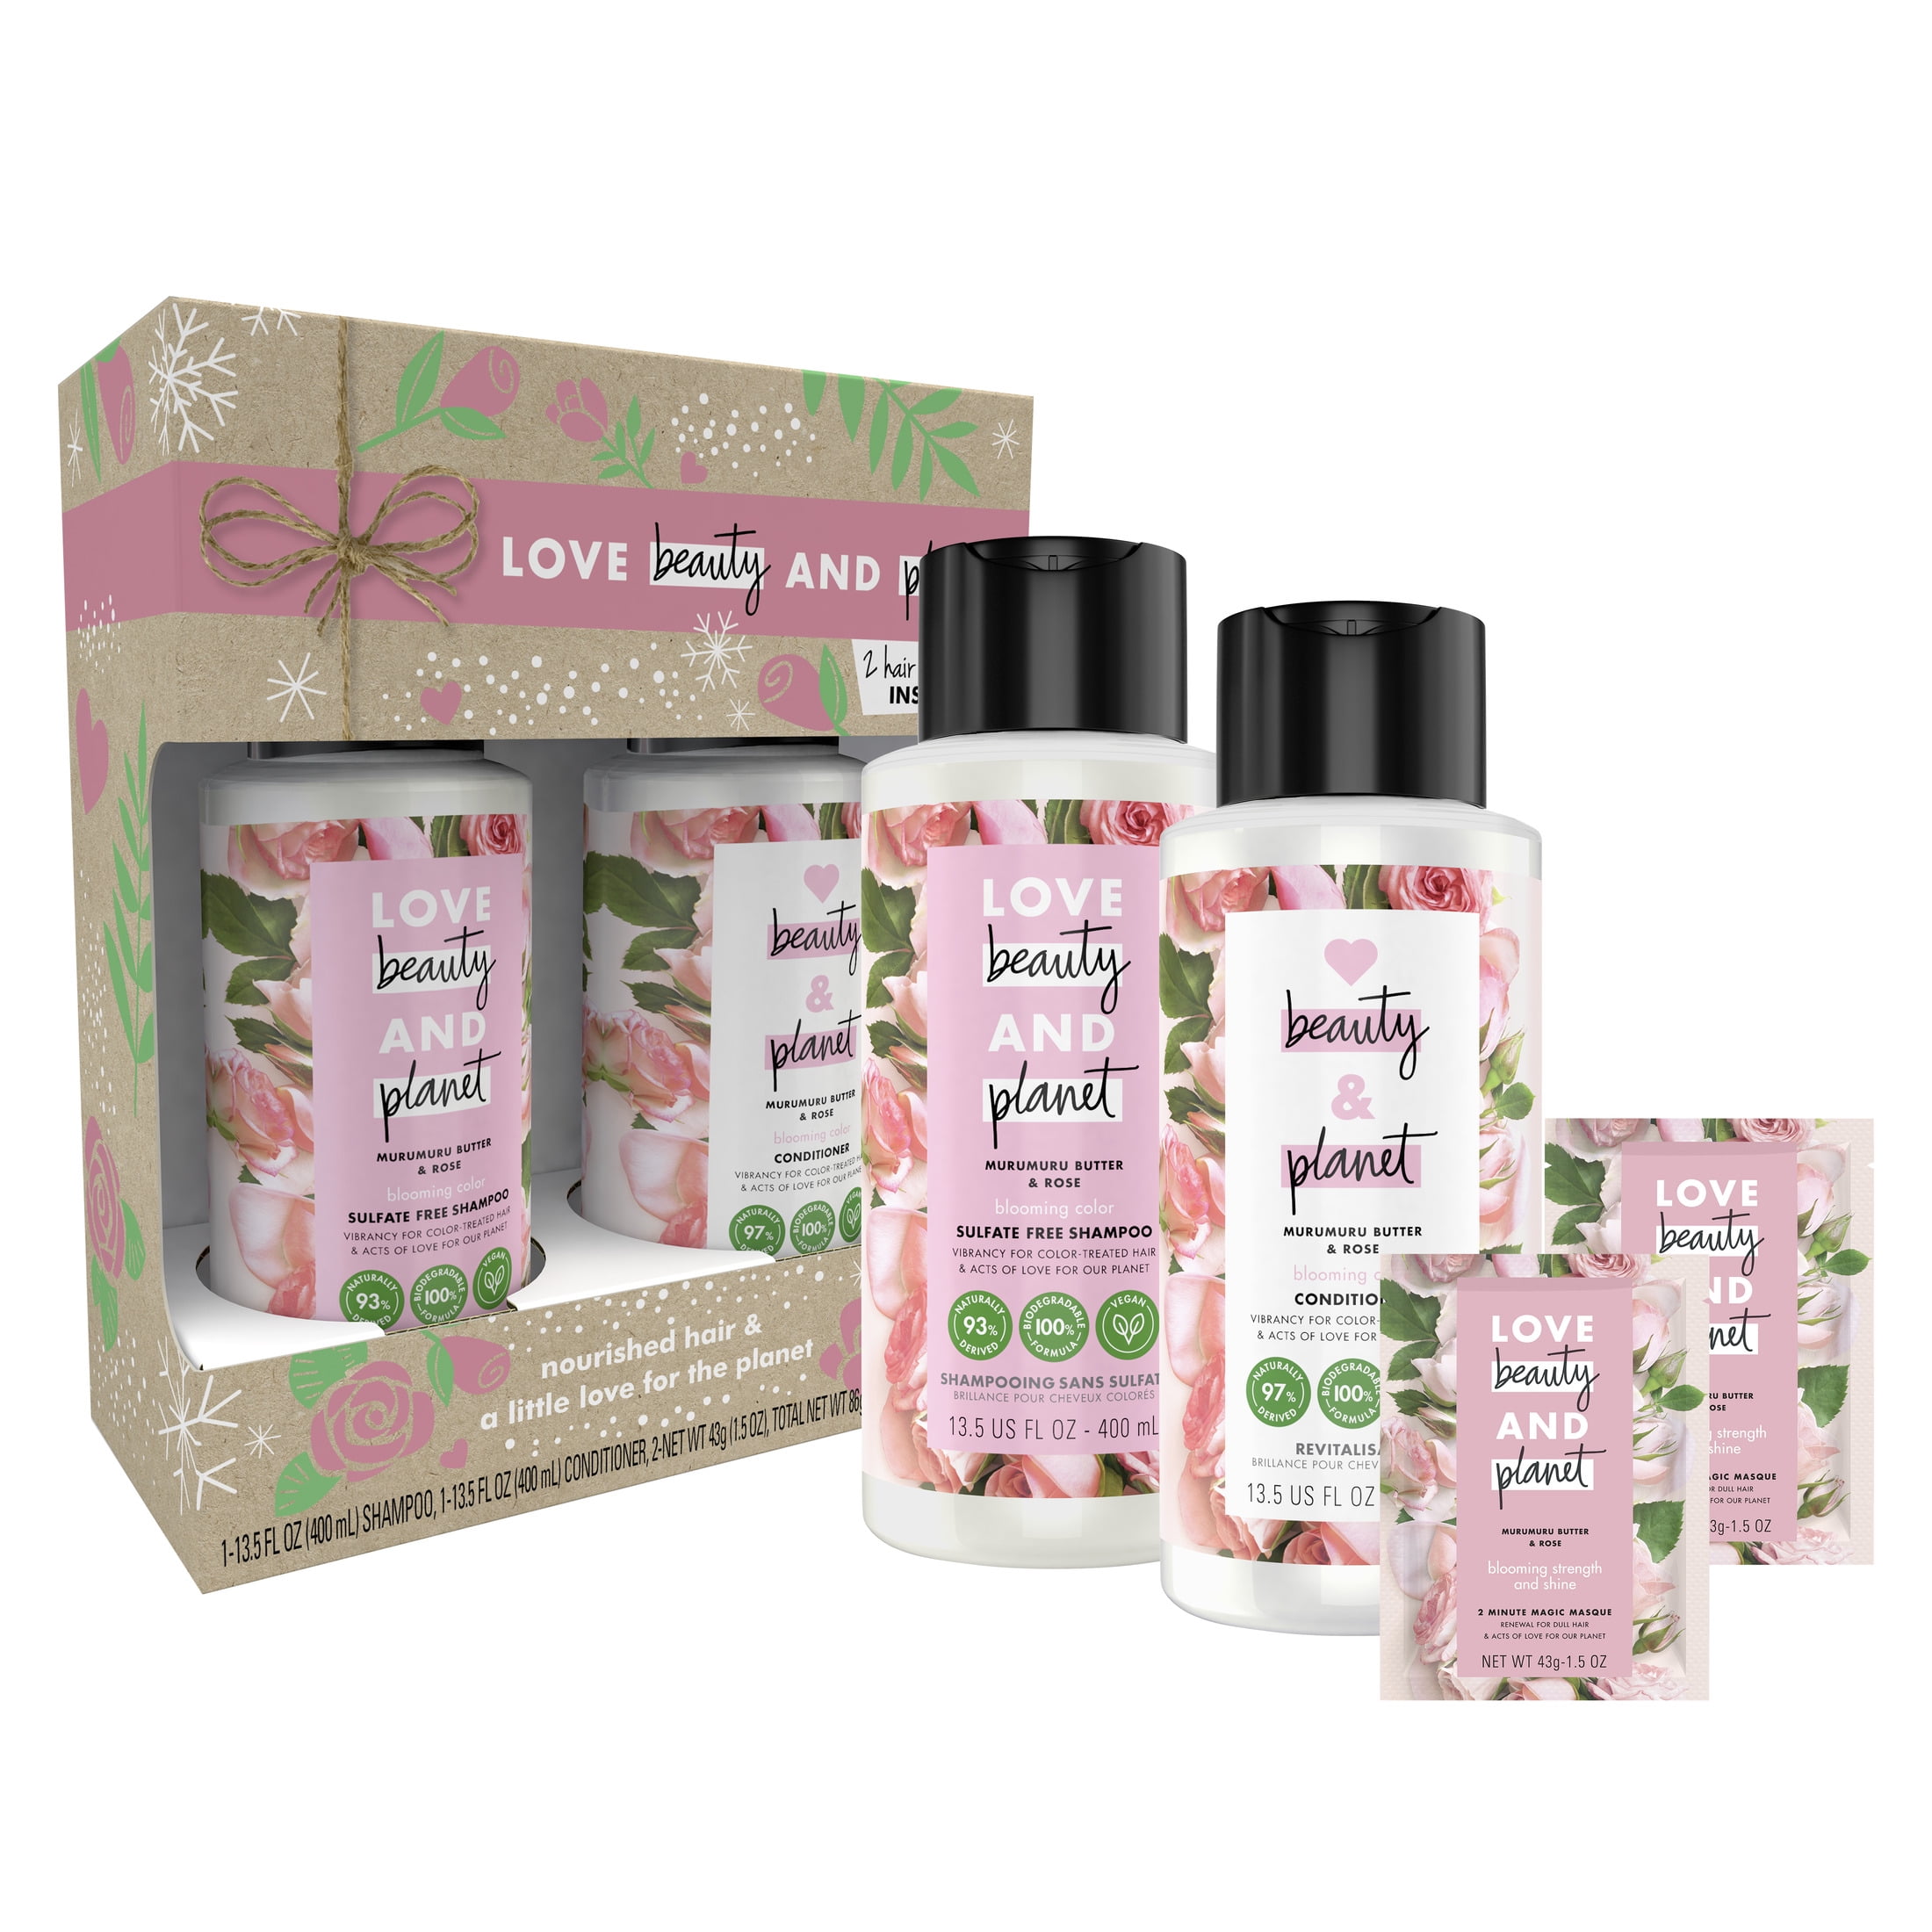 ($18 VALUE) Love Beauty and Planet Murumuru Butter & Rose Shampoo & Conditioner Gift Set, 3 Count